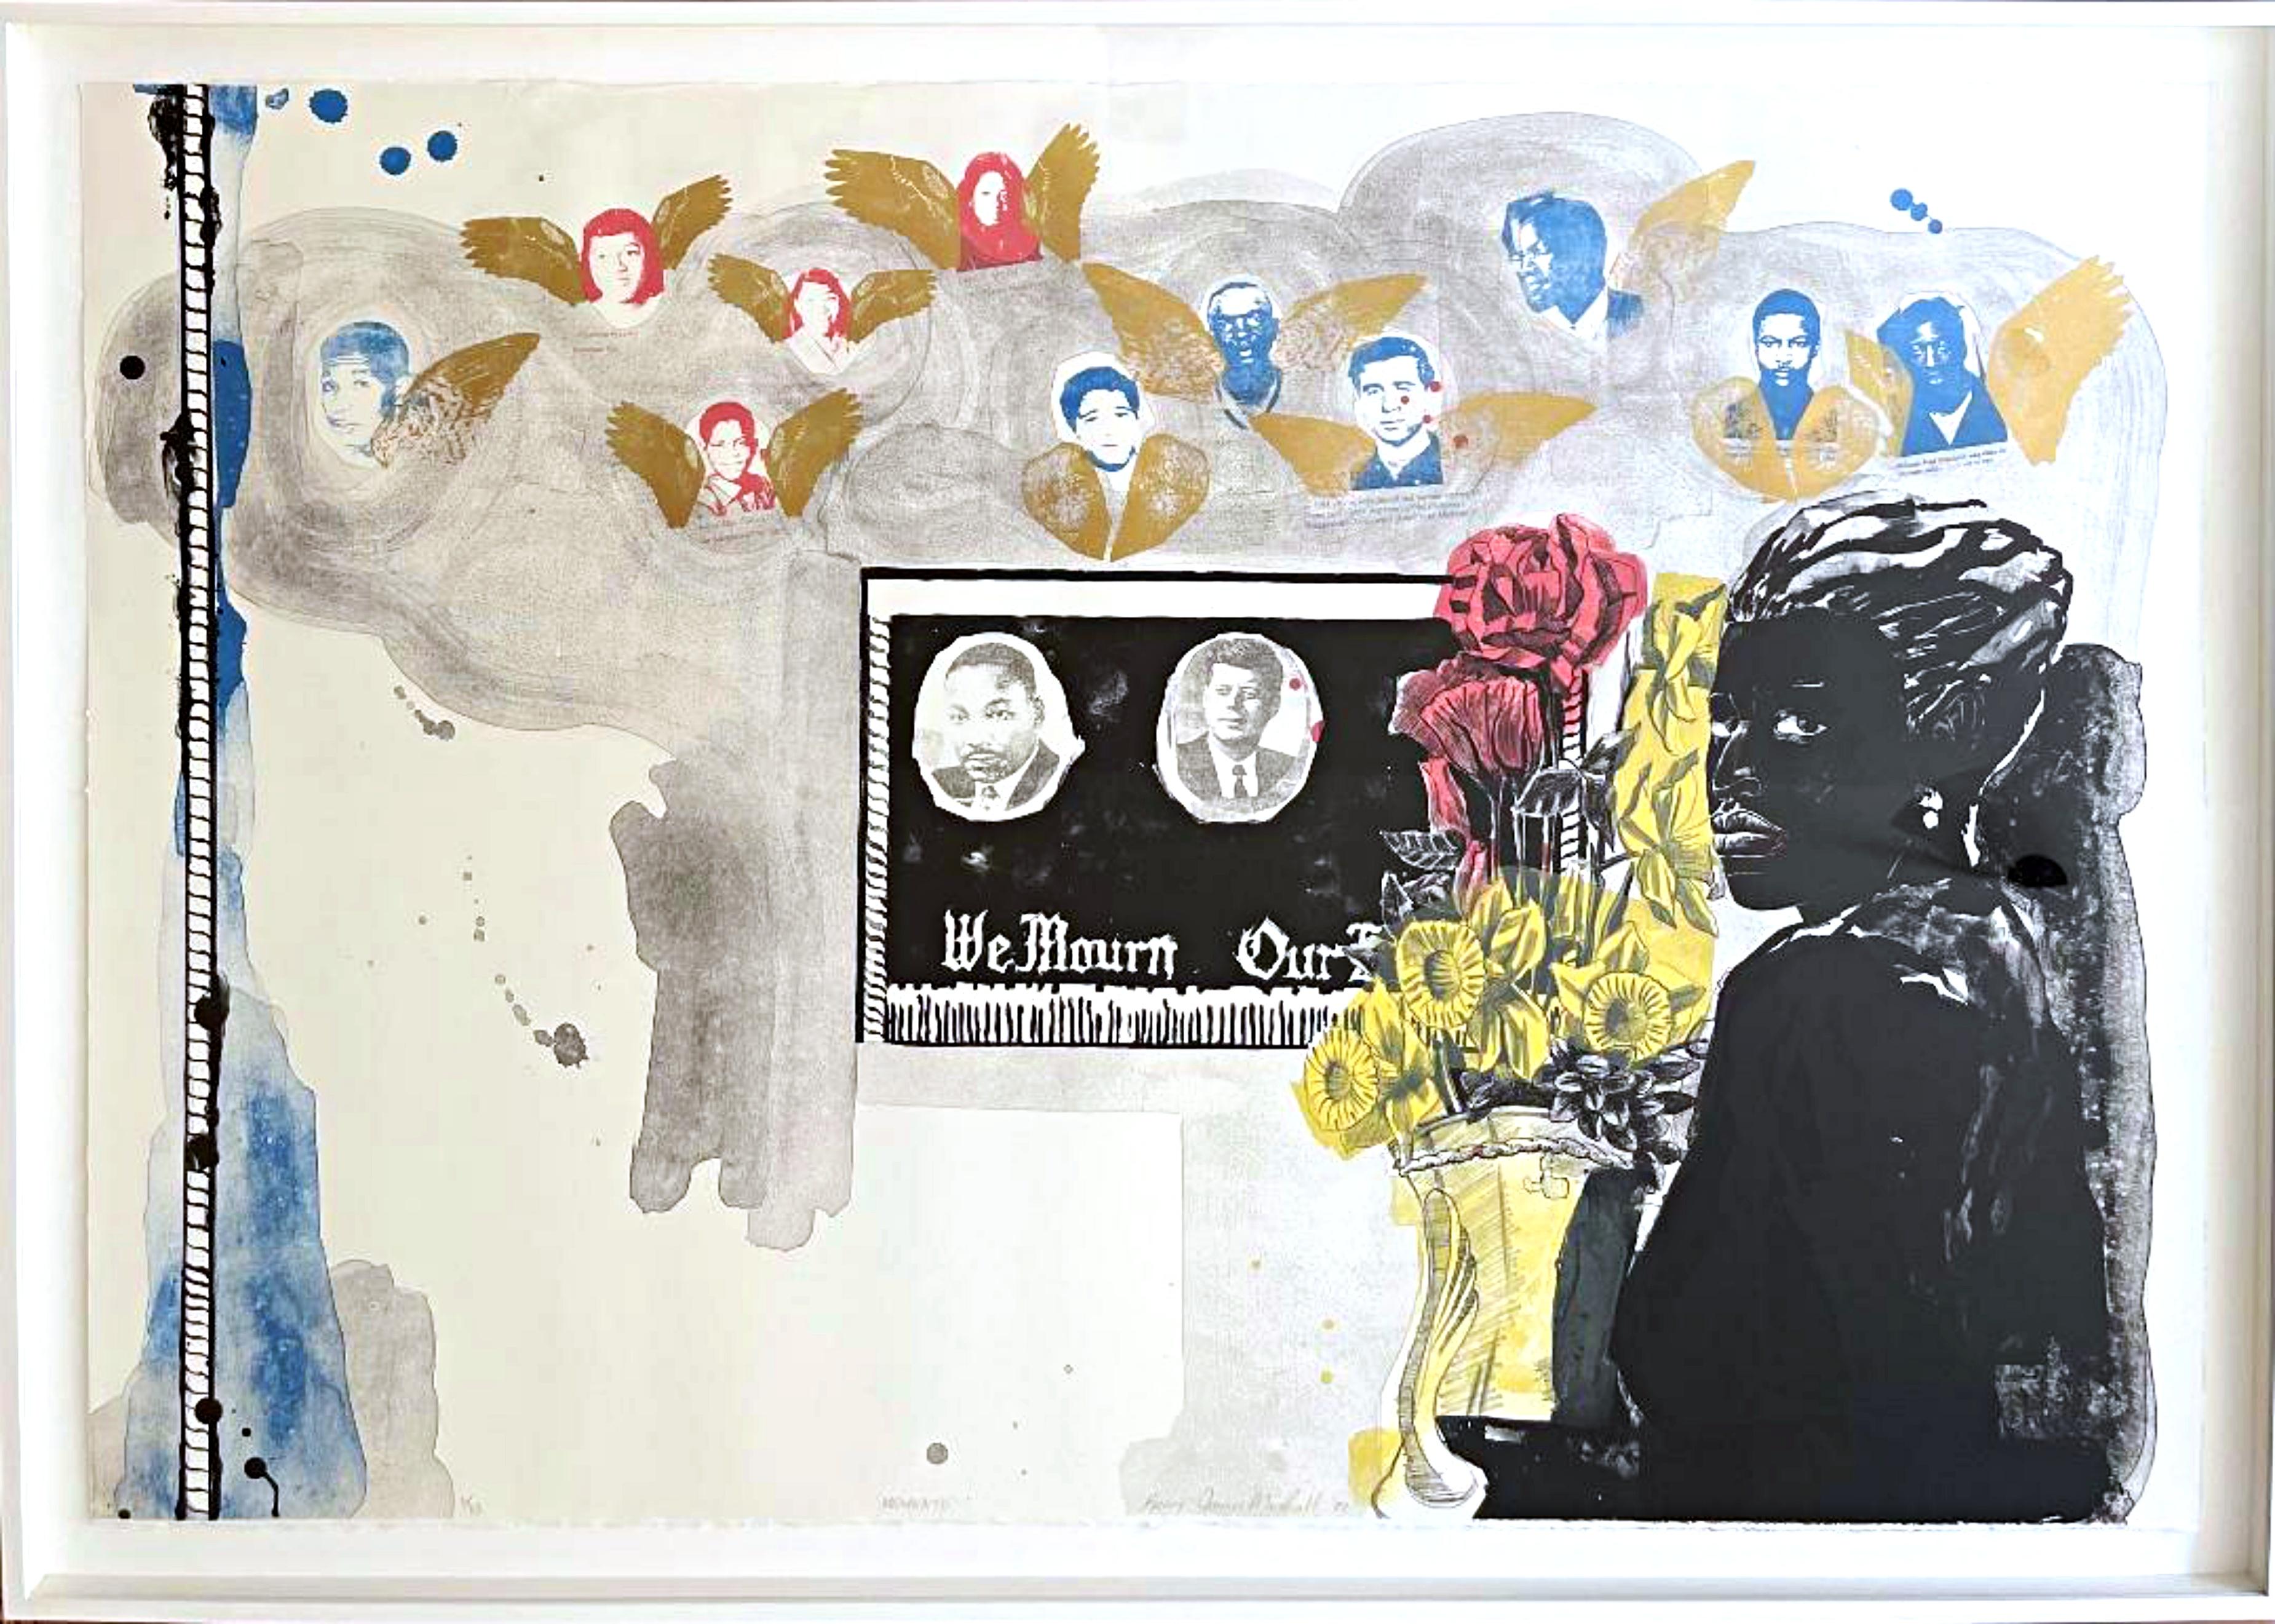 Figurative Print Kerry James Marshall - Memento (Dr. Martin Luther King John F. Kennedy Malcolm X, travailleurs des droits civiques 